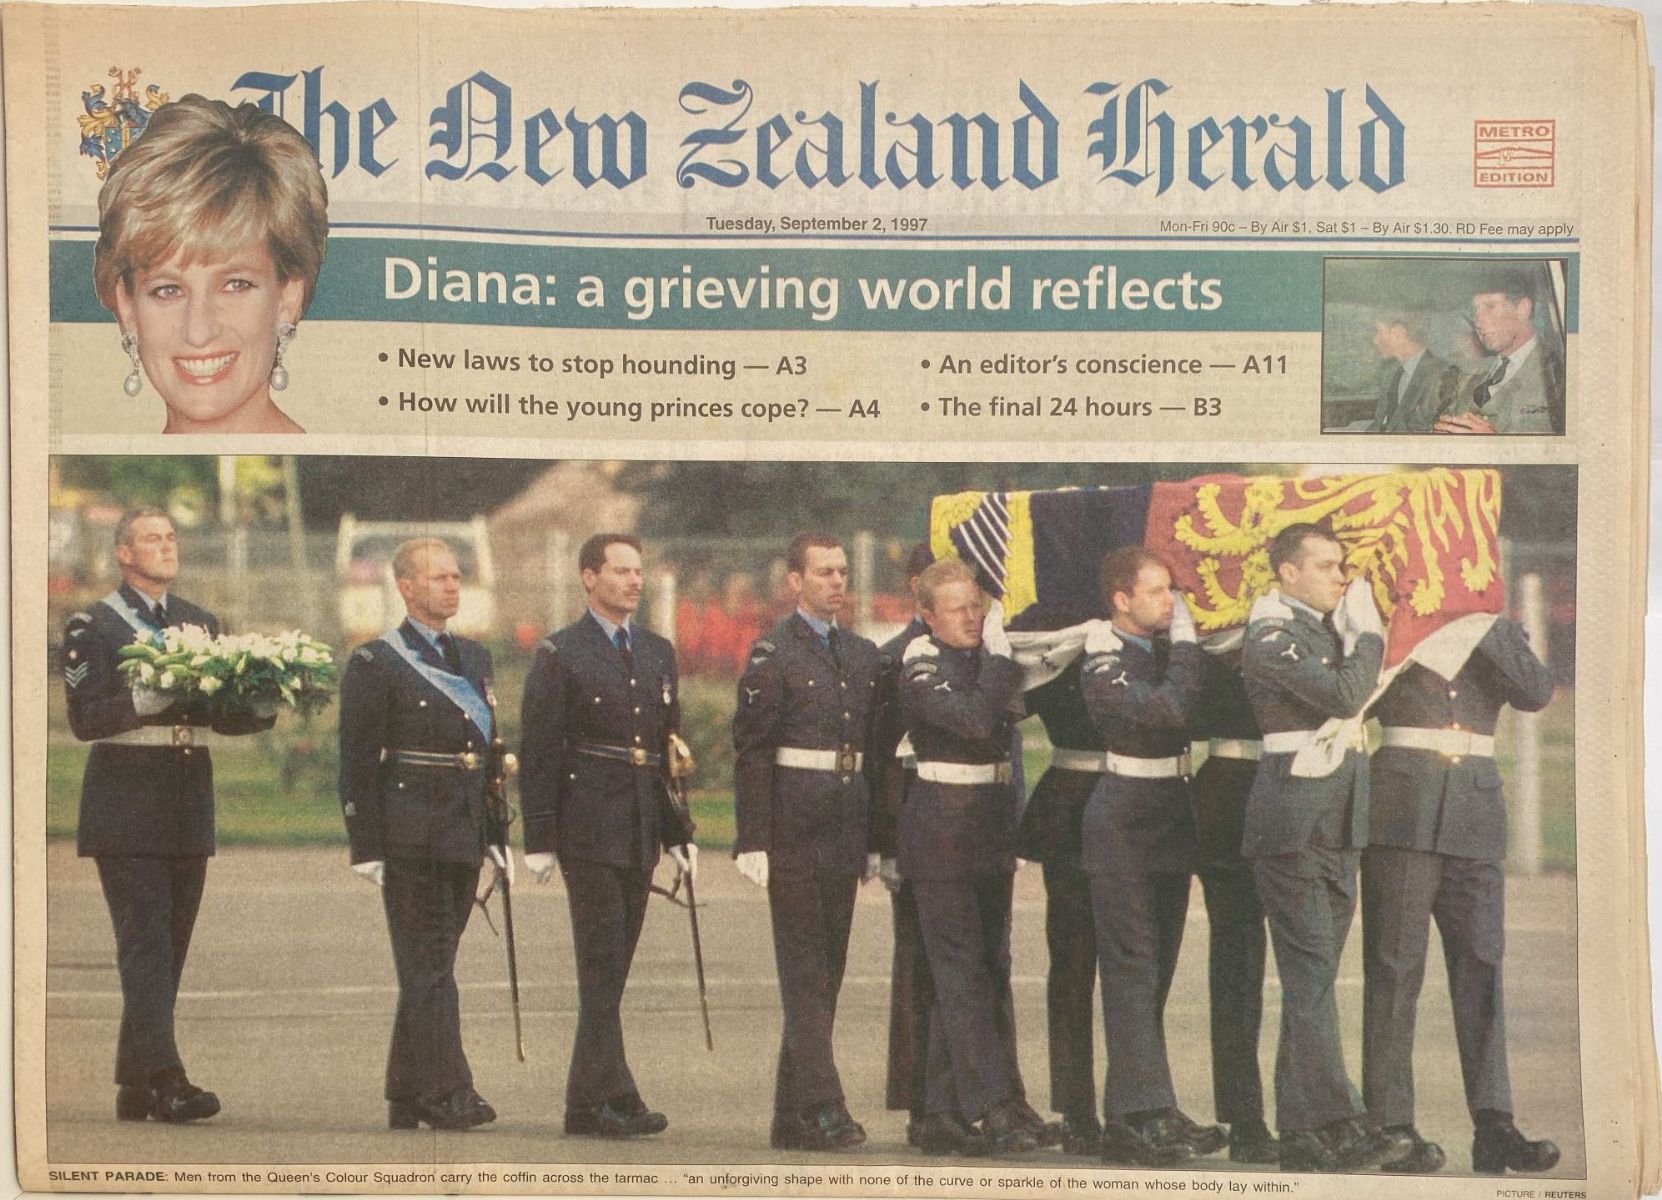 OLD NEWSPAPER: The New Zealand Herald, 2 Sept 1997 - Death of Princess Diana